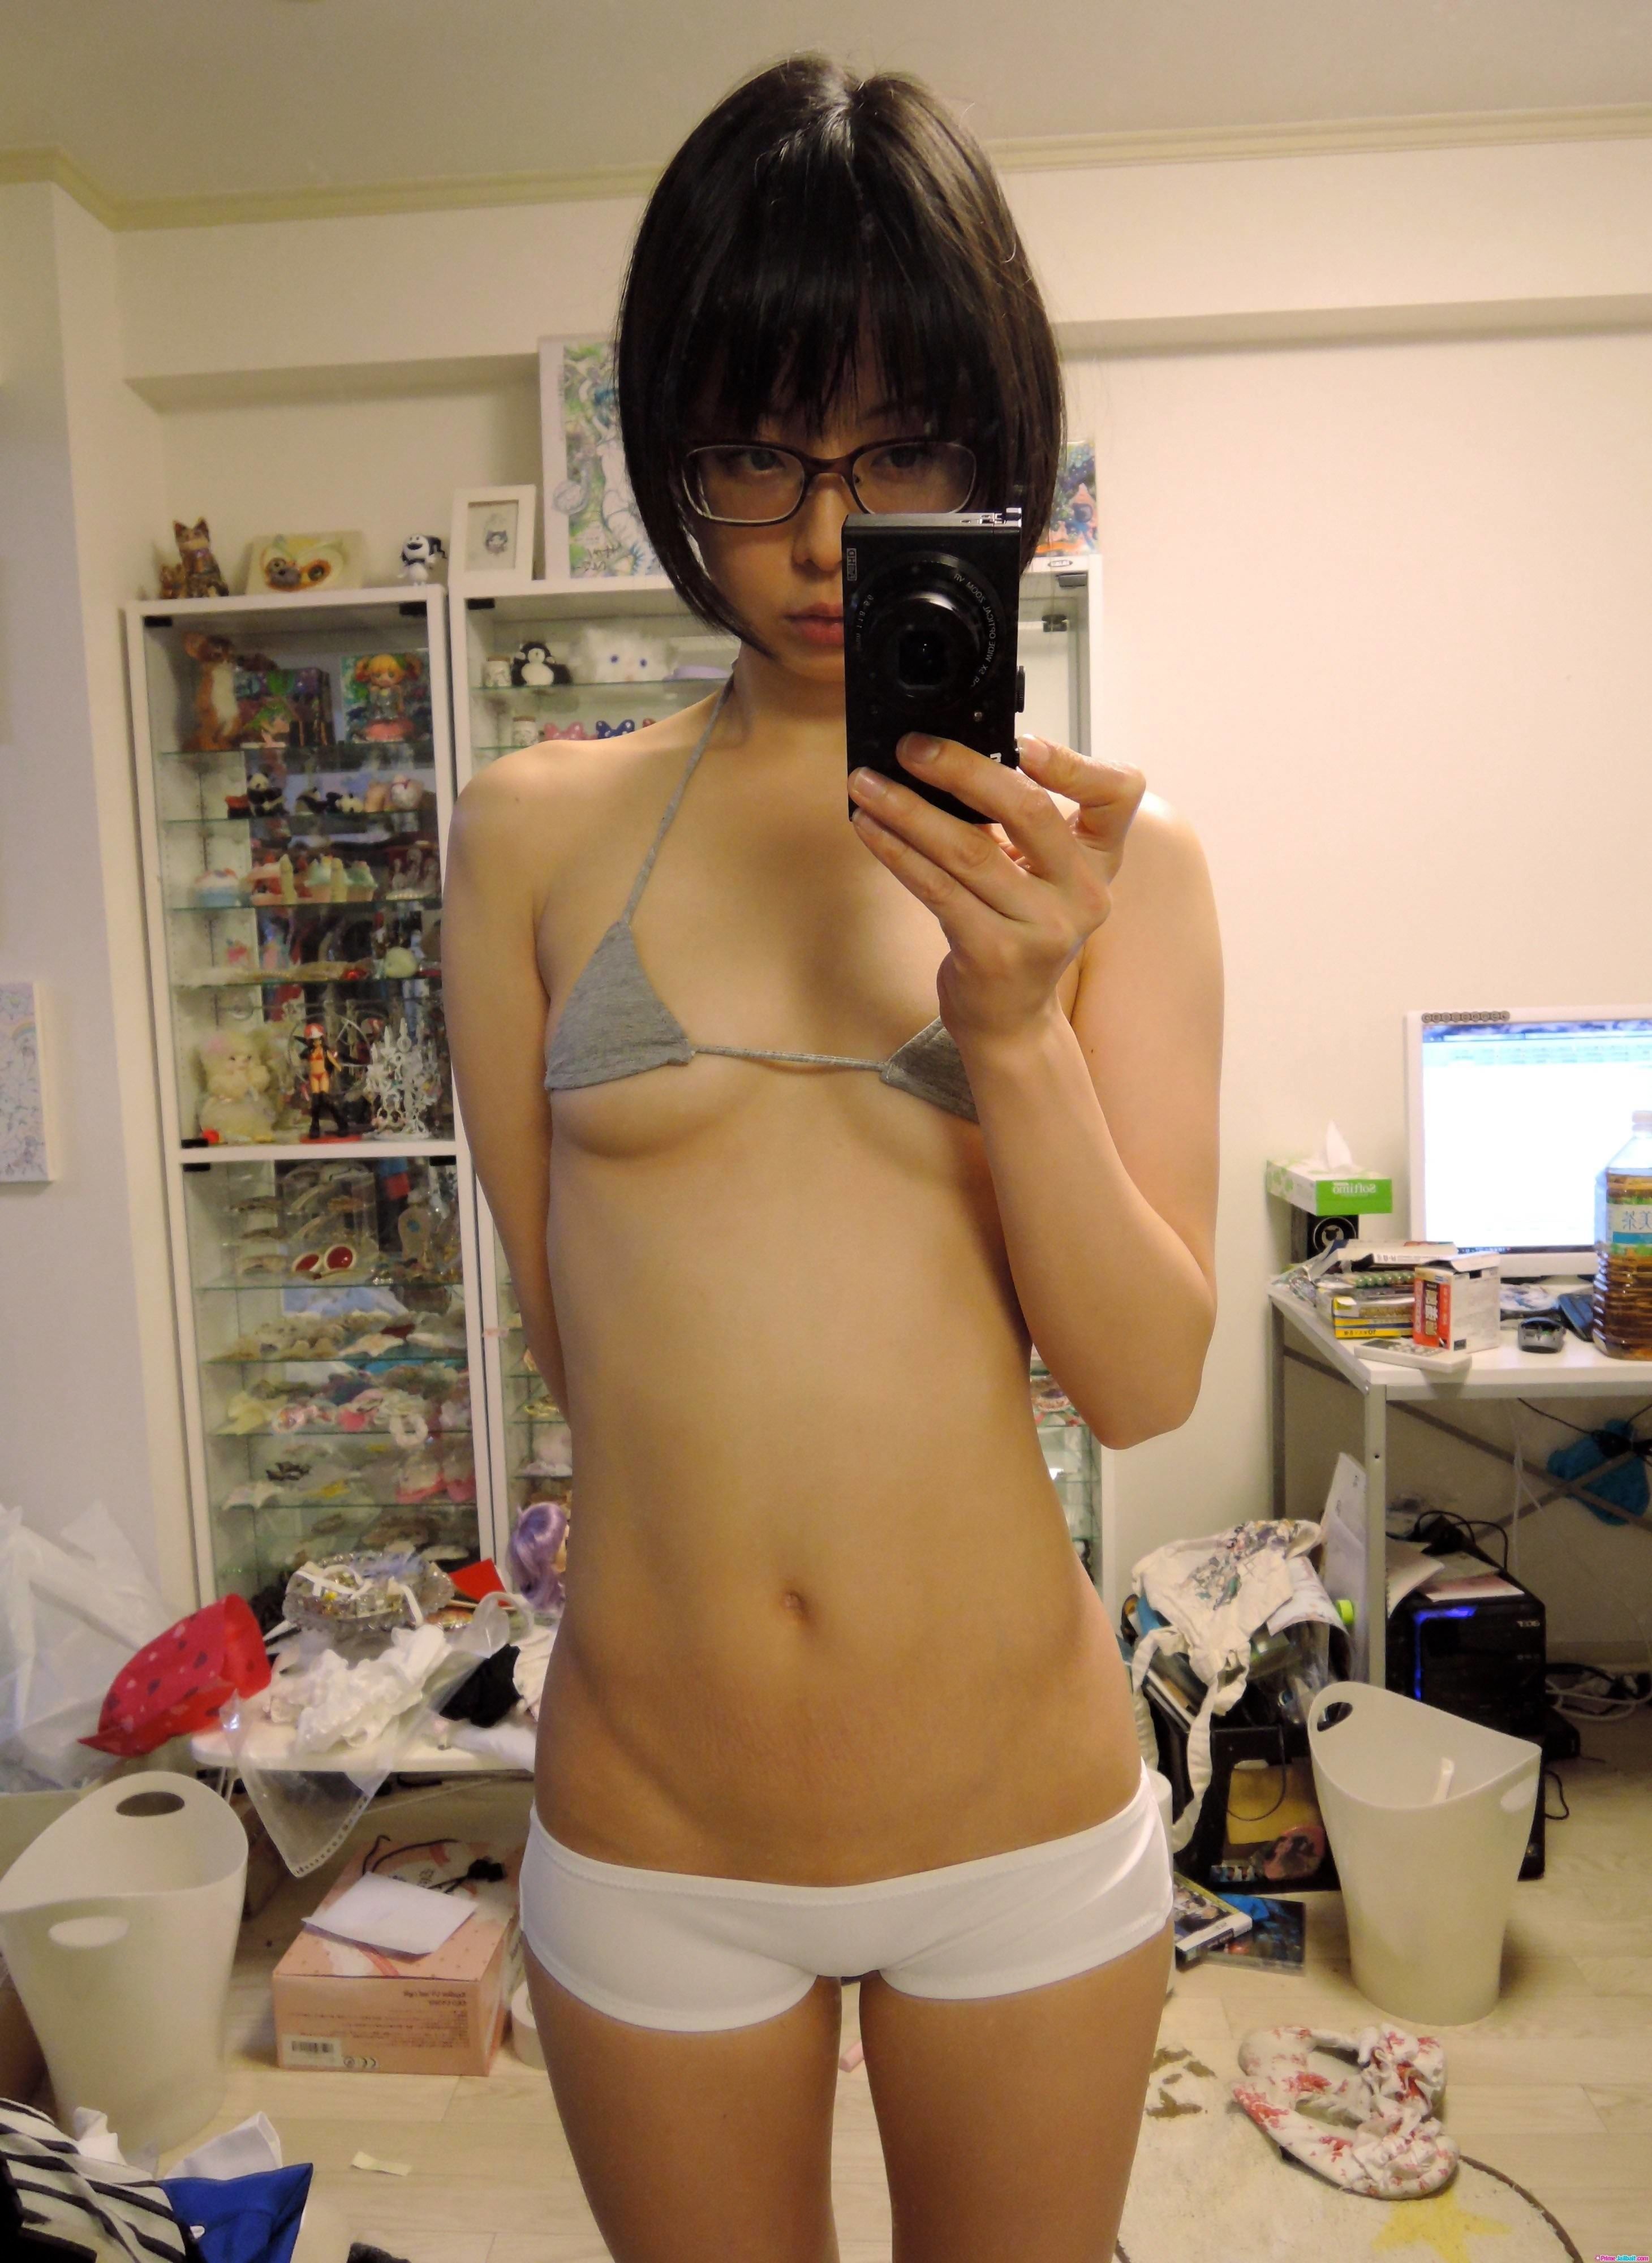 brother sister captions family fucking stories #glasses #nerdy #asian #skinnyteen #smalltits #asianteen #selfie #amateur